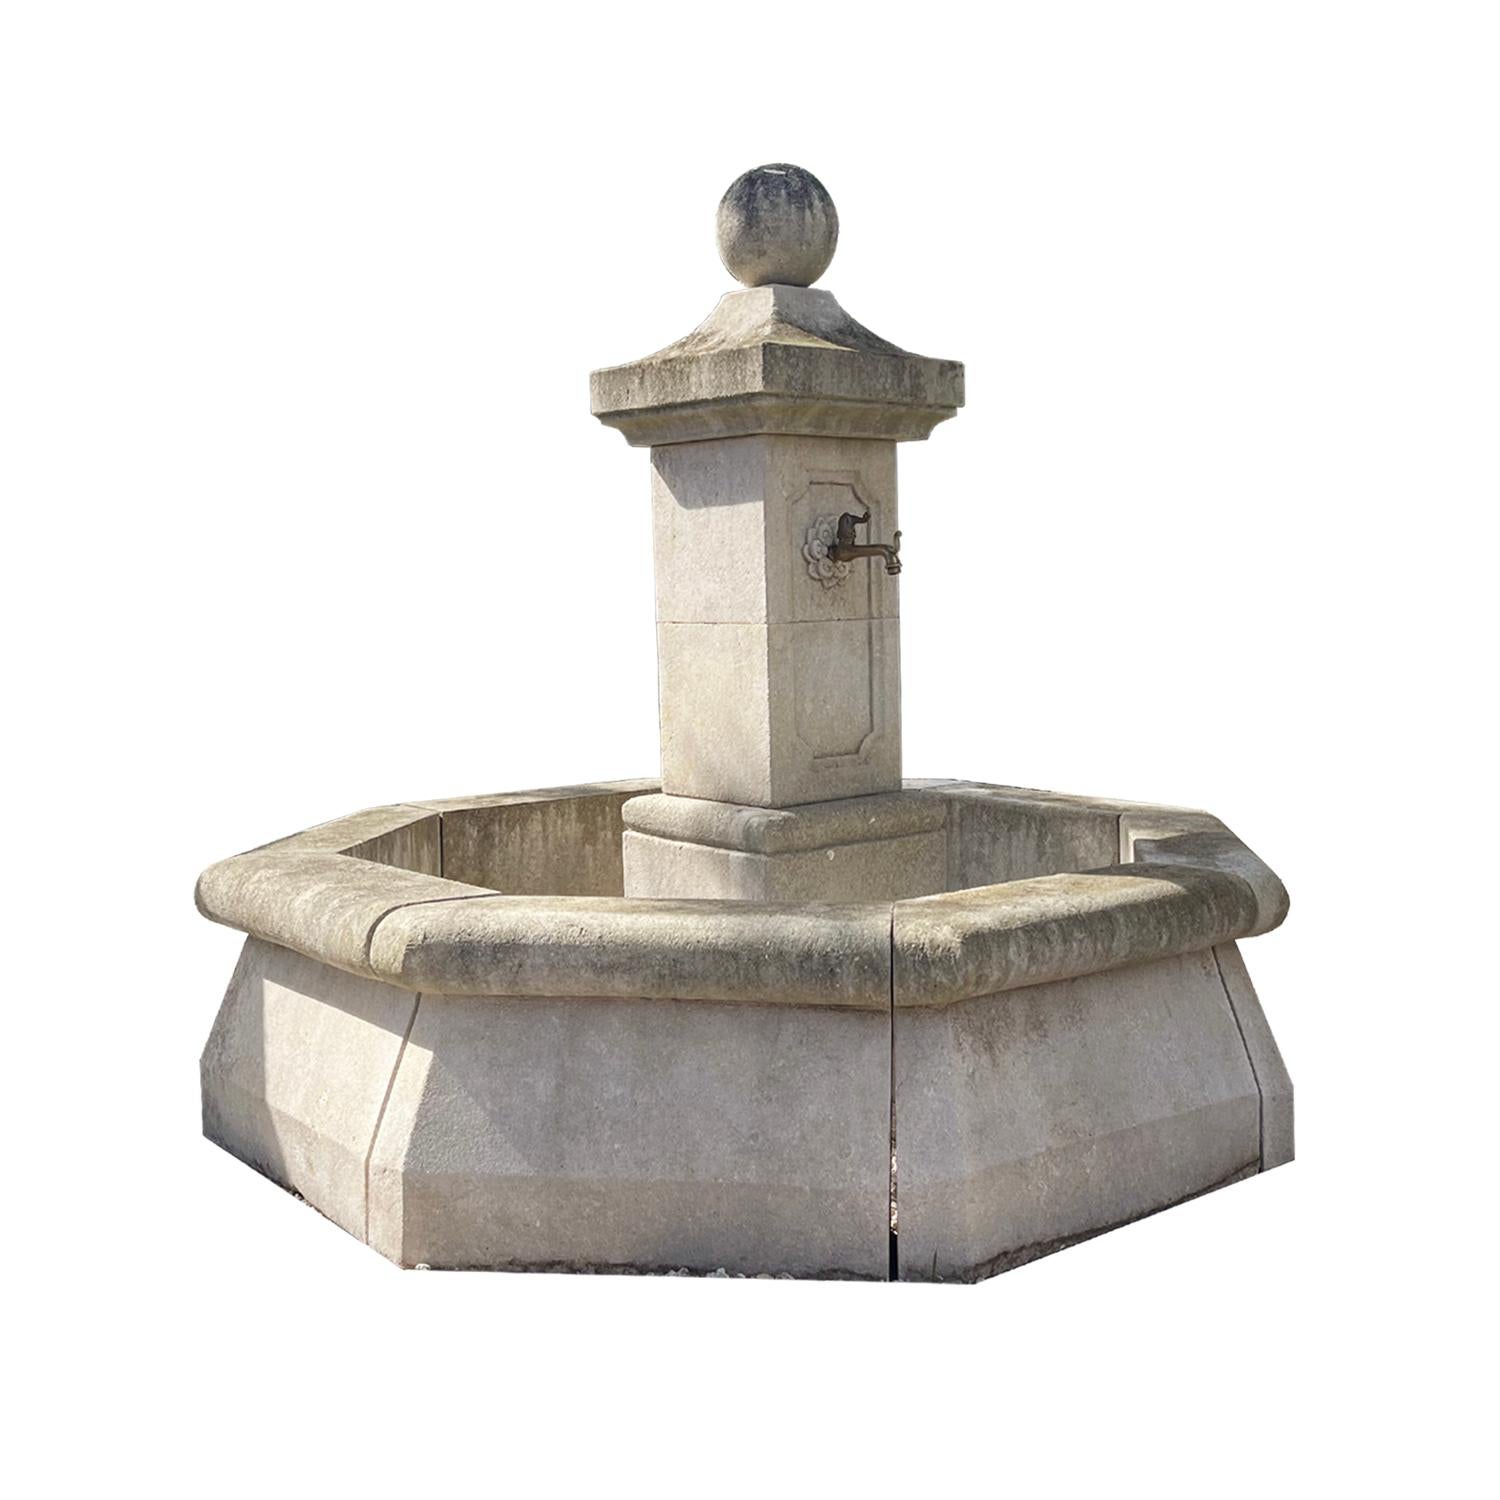 The very traditional octagonal garden fountain was hand carved in limestone after an 18th Century original (fountain du reservoir) and can still be seen nowadays in the French villages. This Provencal water fountain has a square paneled central